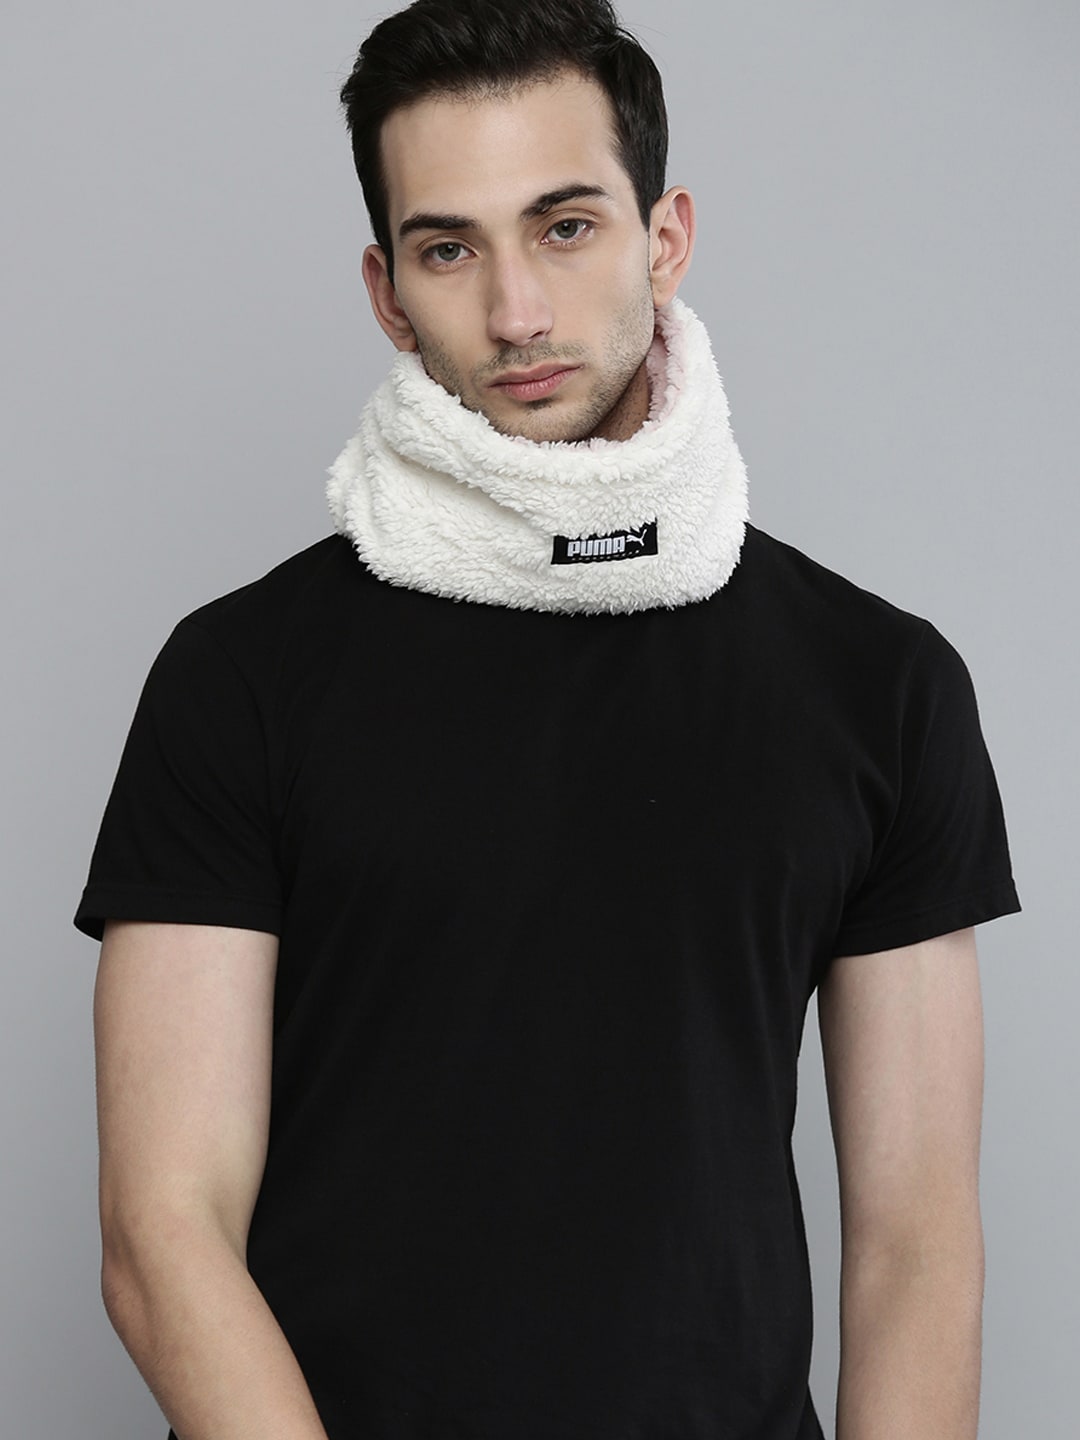 Puma Unisex Cream-Coloured & Pink Solid Reversible Neck Warmer Price in India